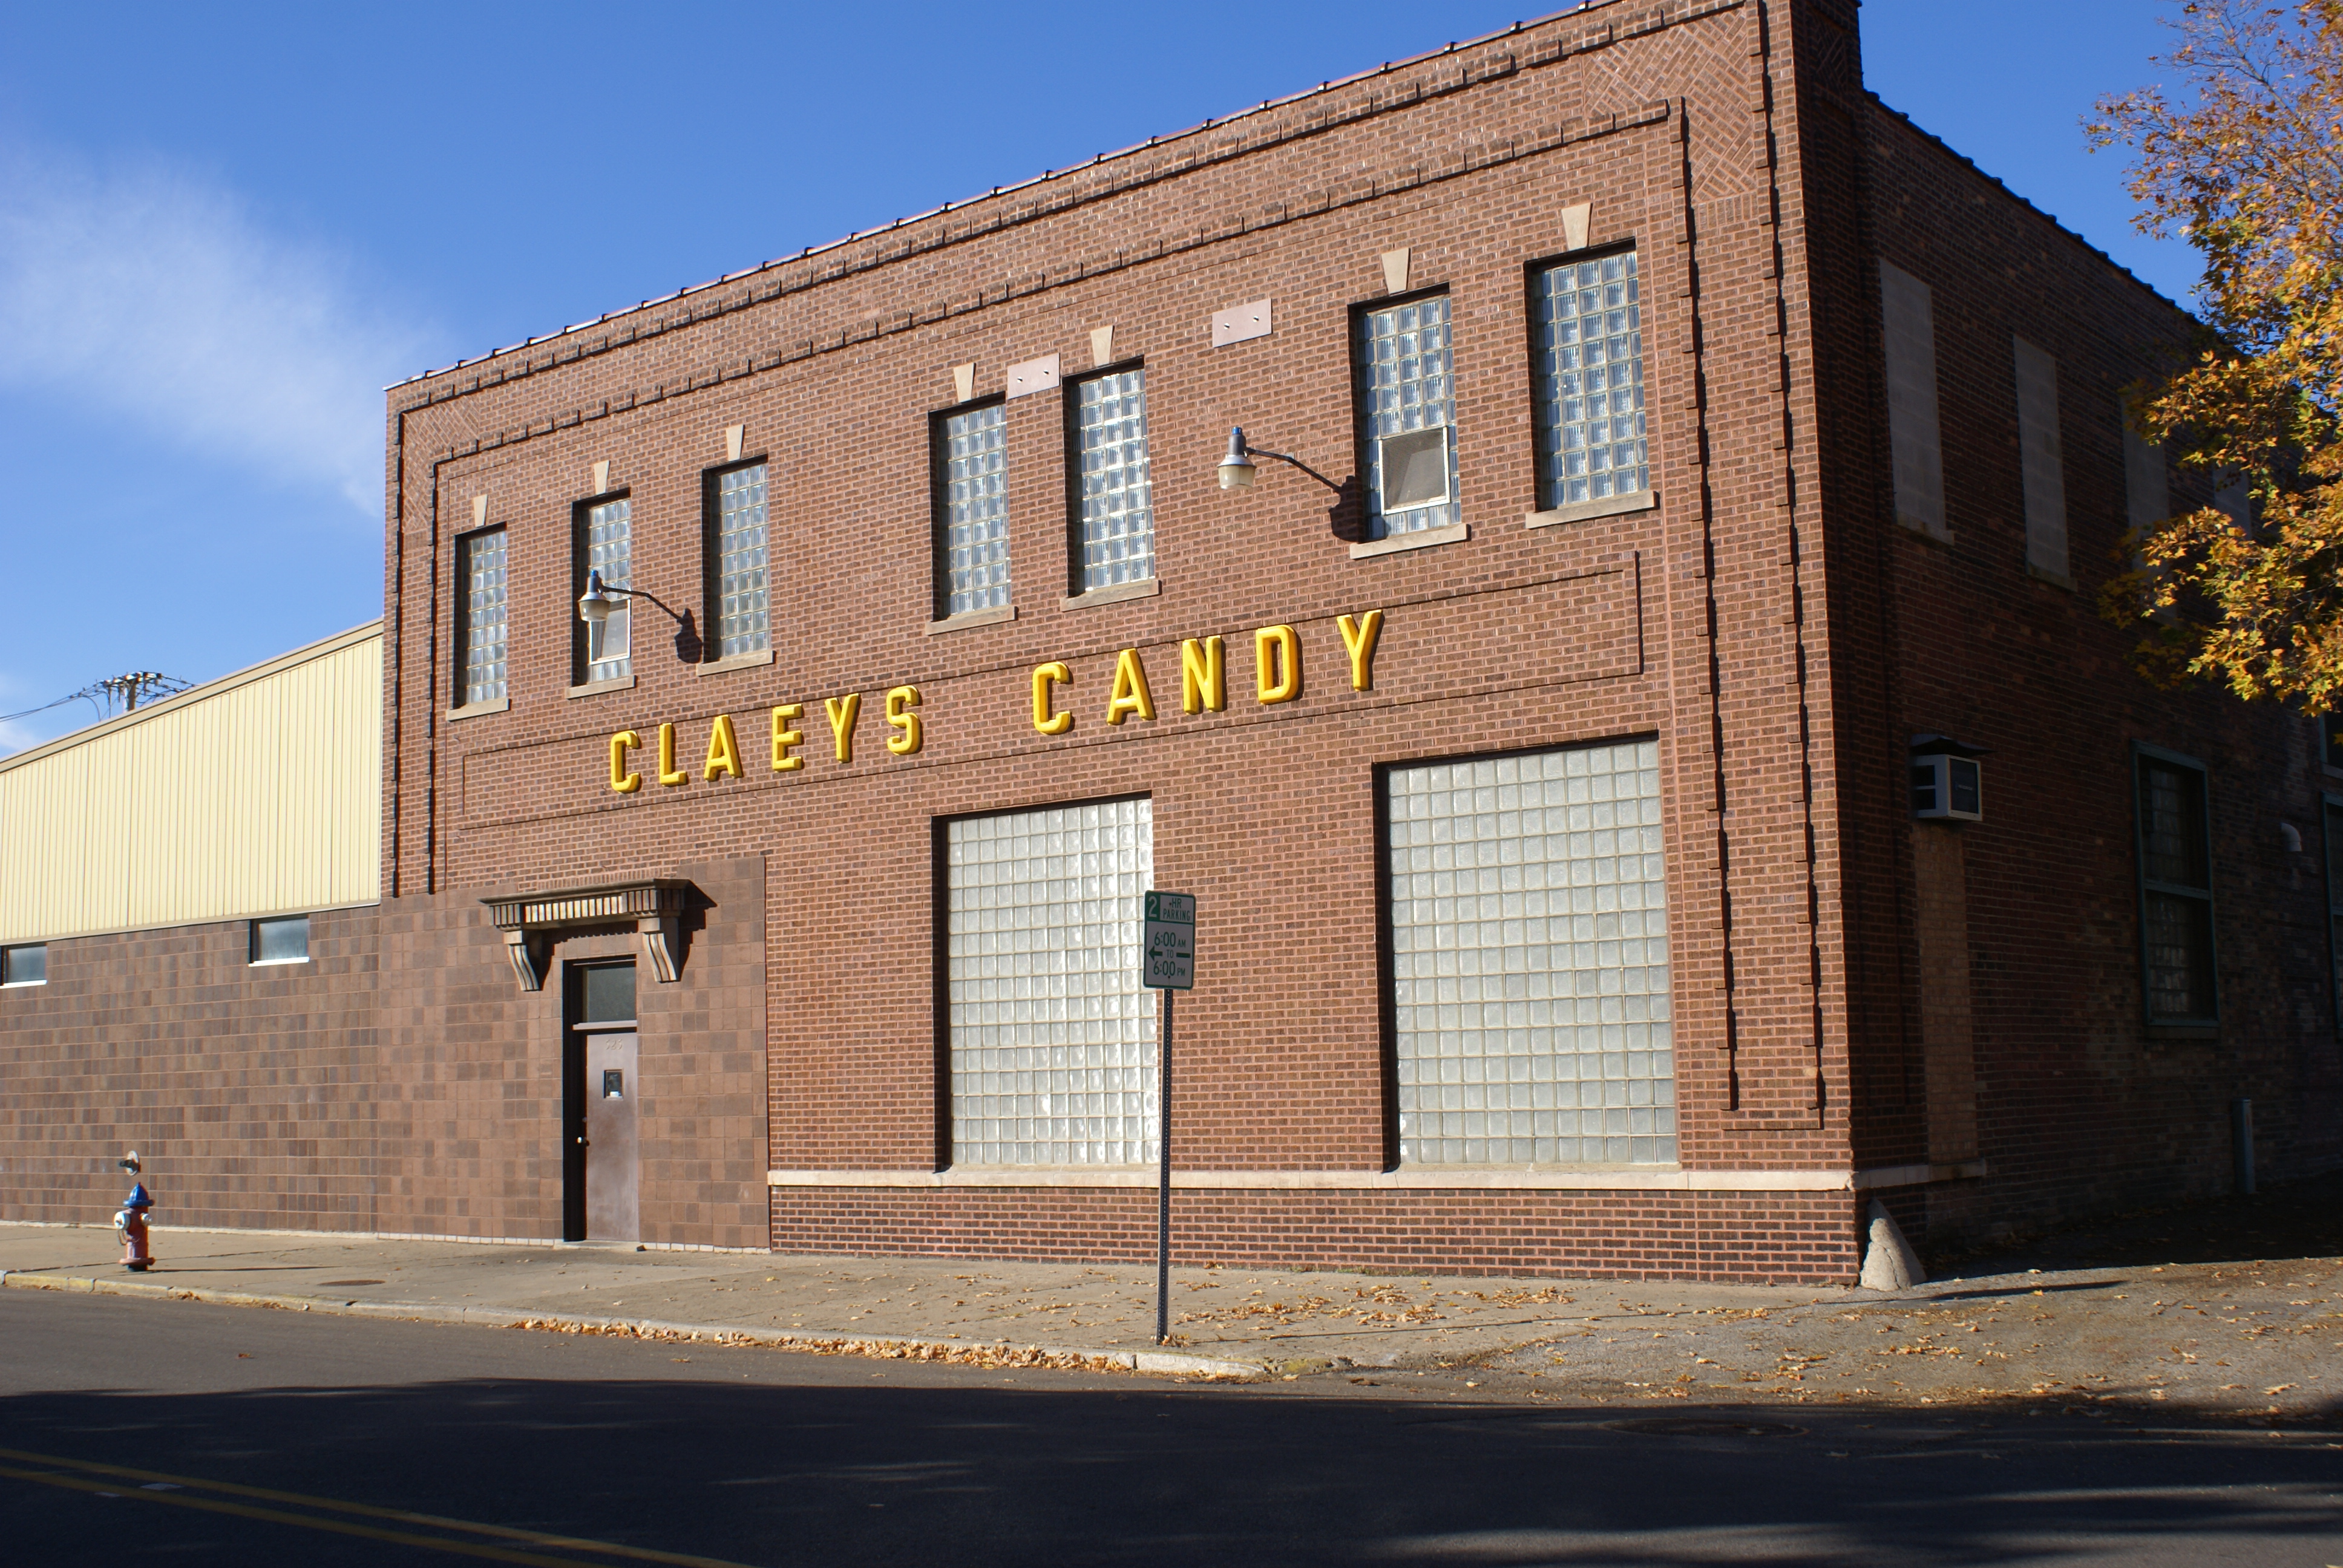 Claey's Candy building